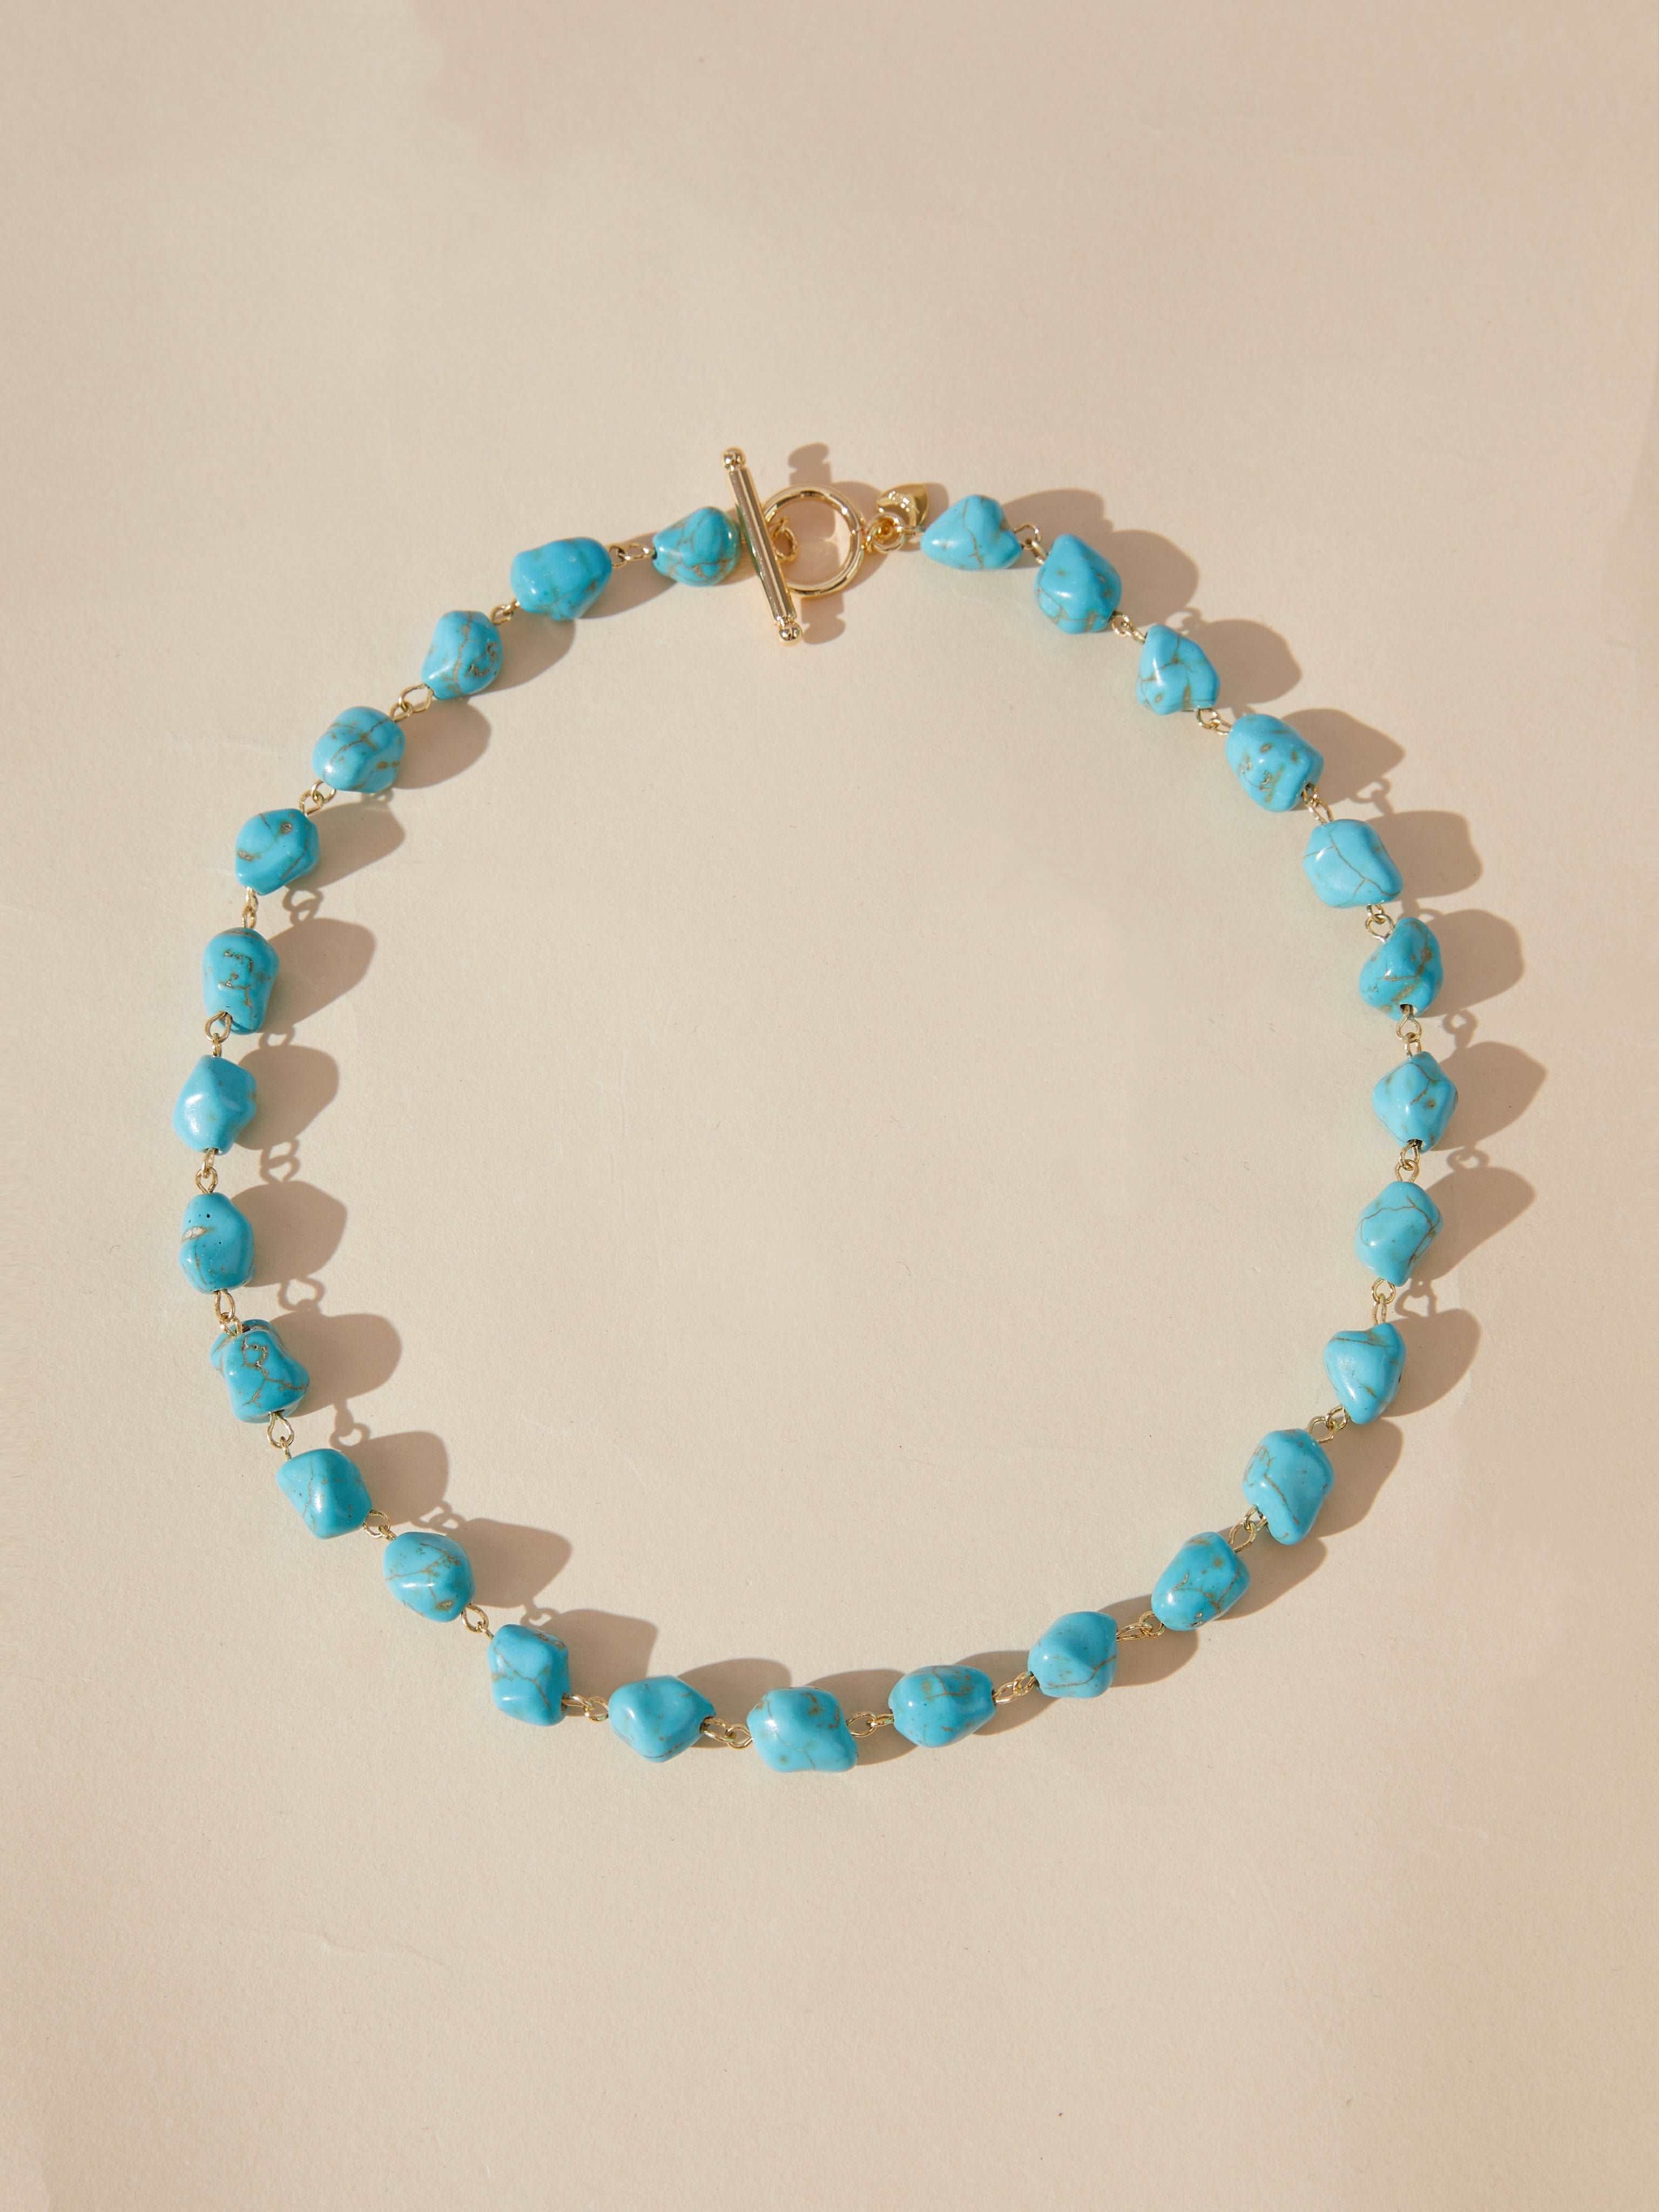 wearing Turquoise Necklace